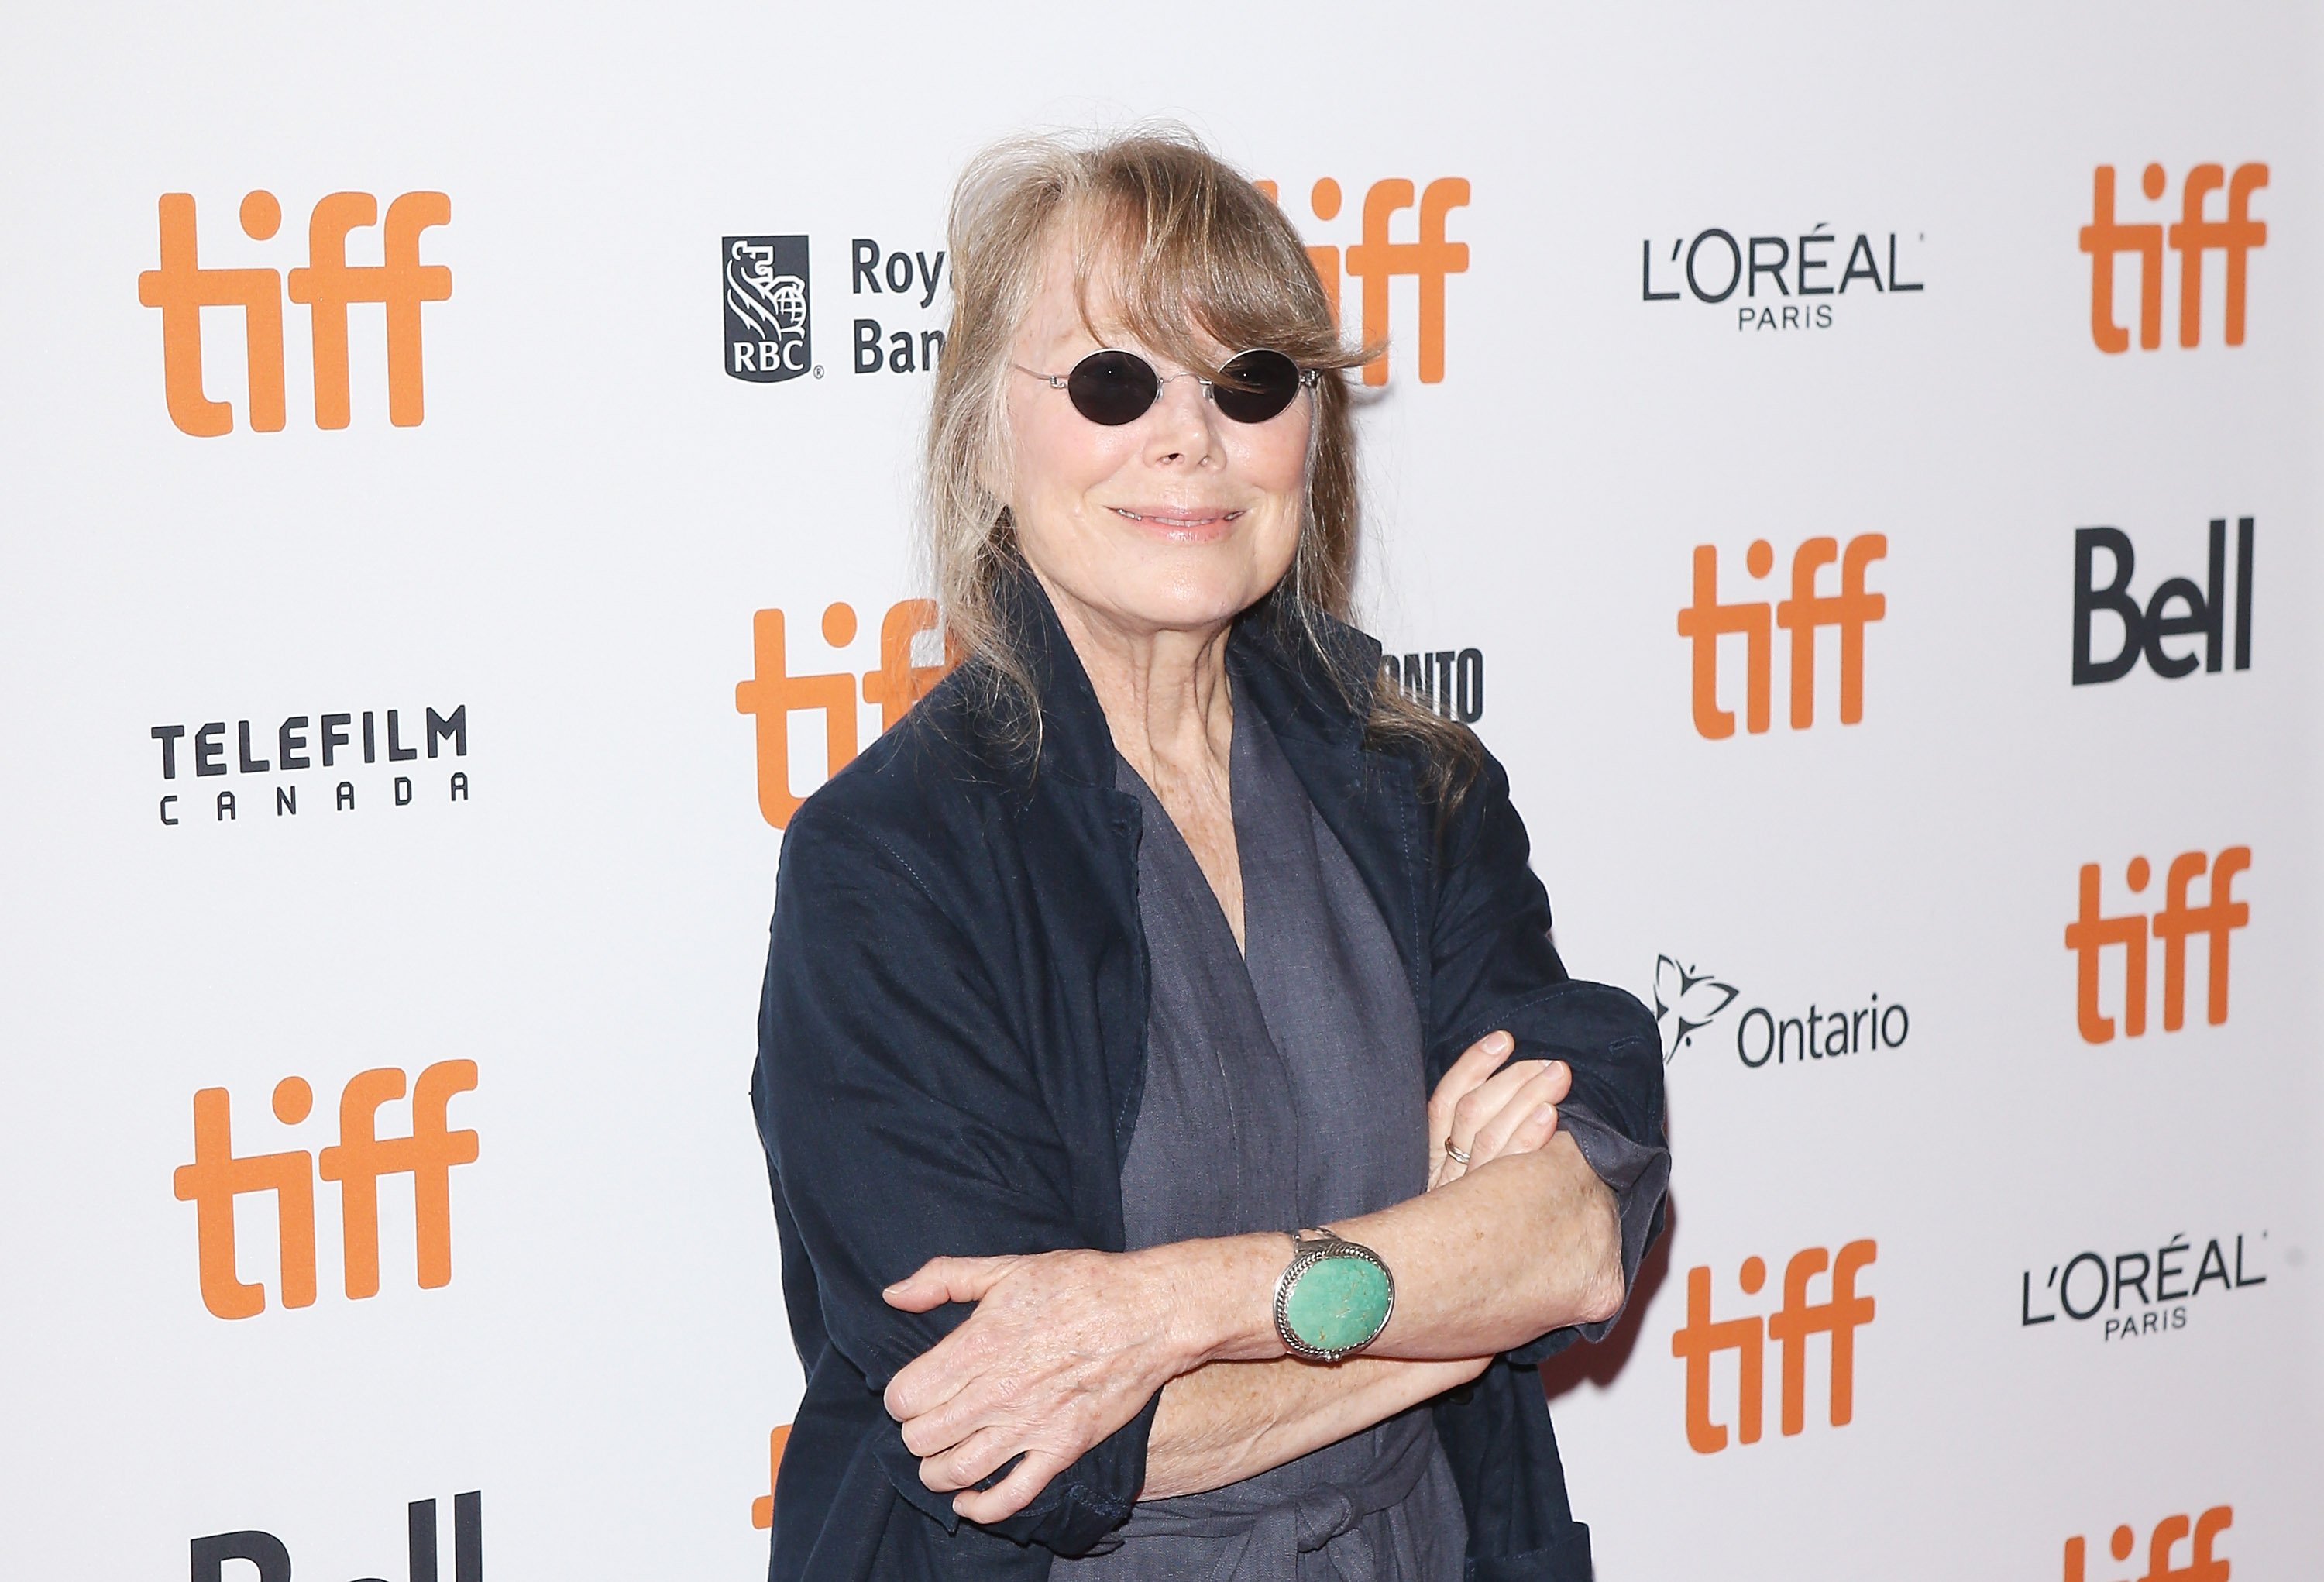 Sissy Spacek attends the premiere of "Homecoming" during the 2018 Toronto International Film Festival held on September 7, 2018 | Photo: Getty Images